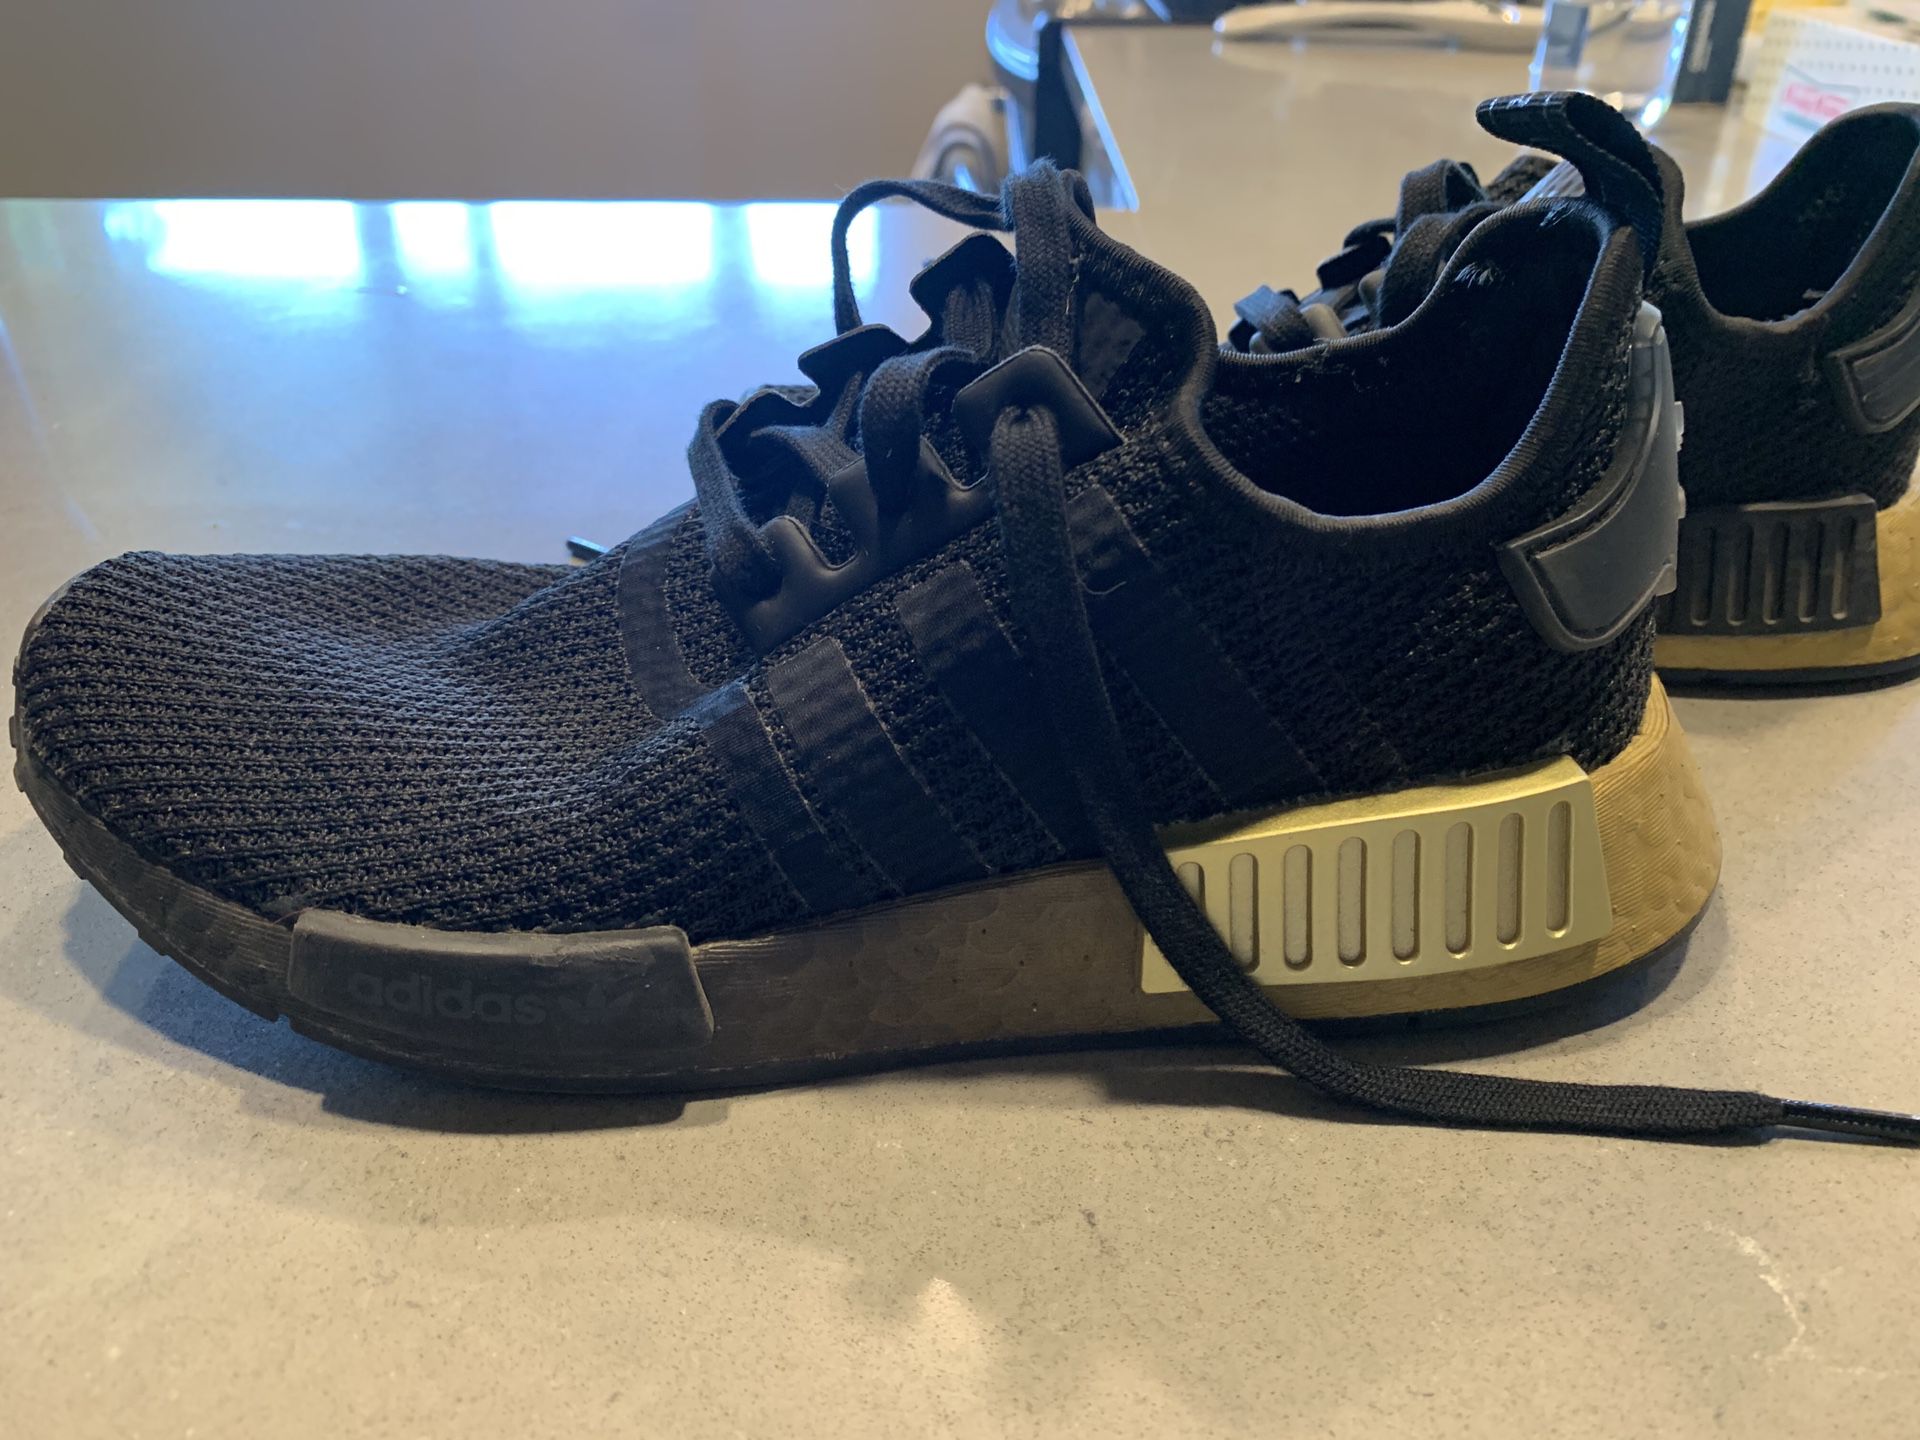 Adidas NMD_R1 Women’s shoes